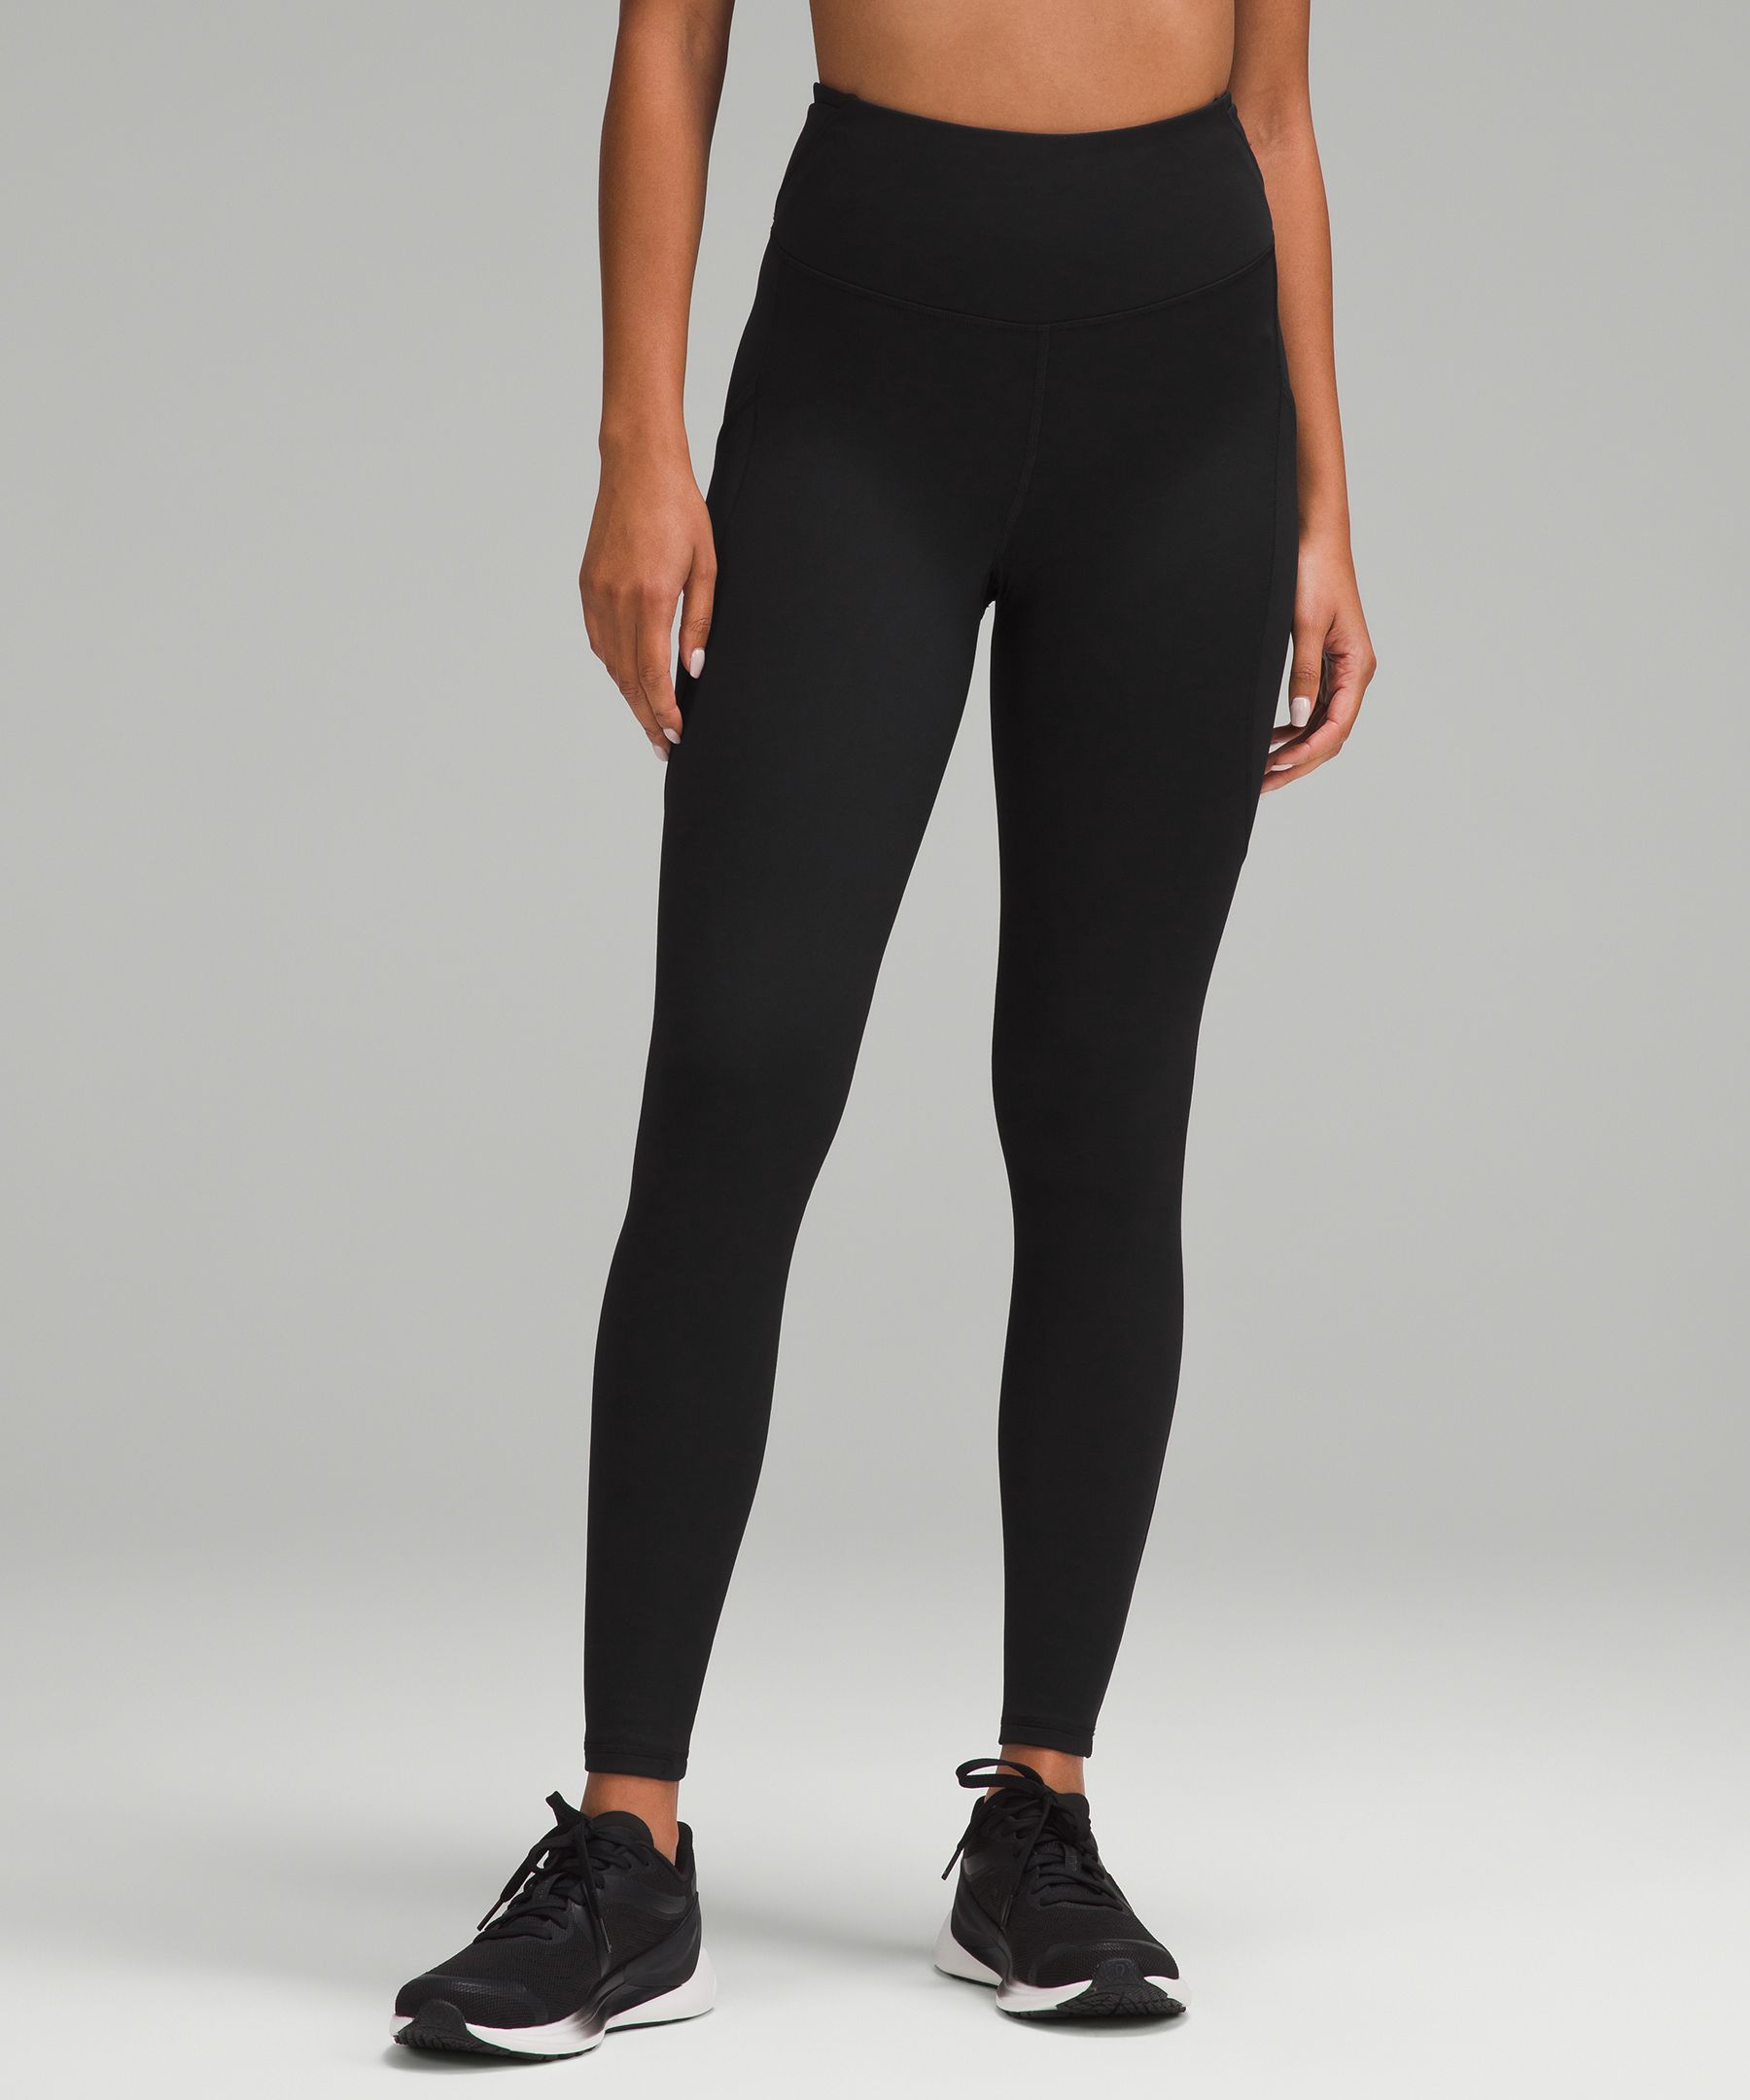 Lululemon Fast and Free High-Rise Fleece Tight 28